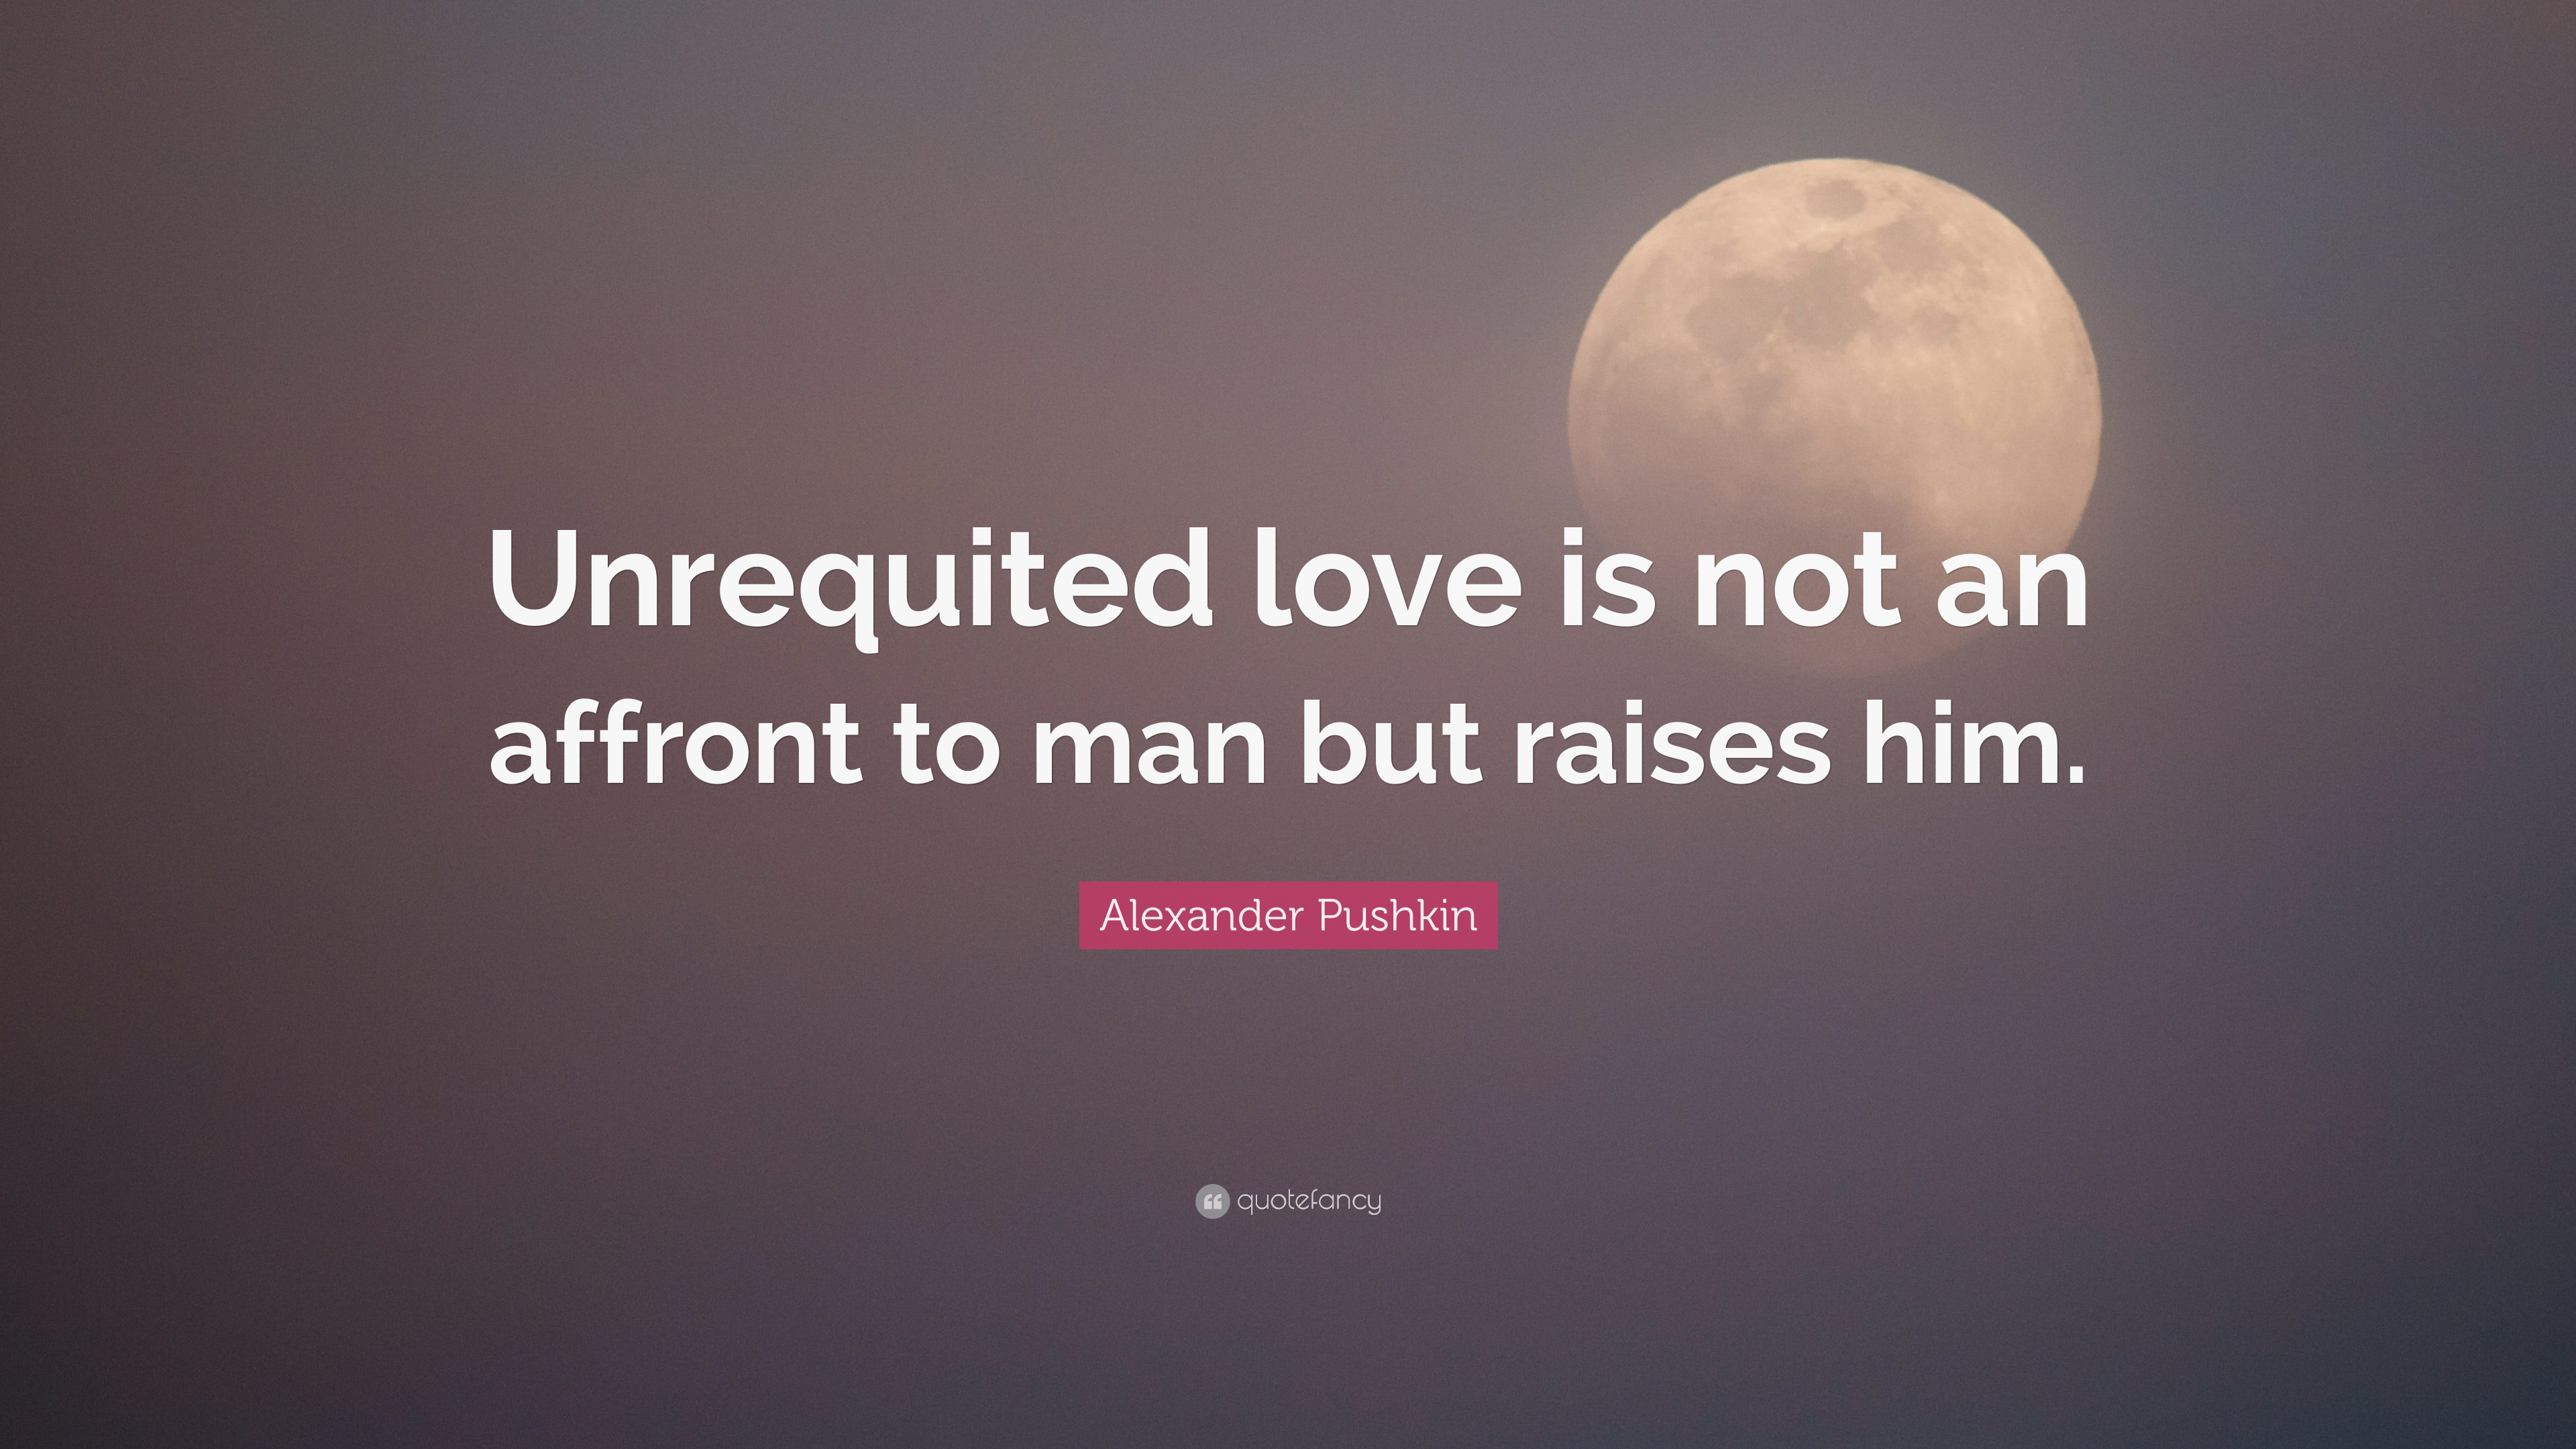 Alexander Pushkin Quote: “Unrequited love is not an affront